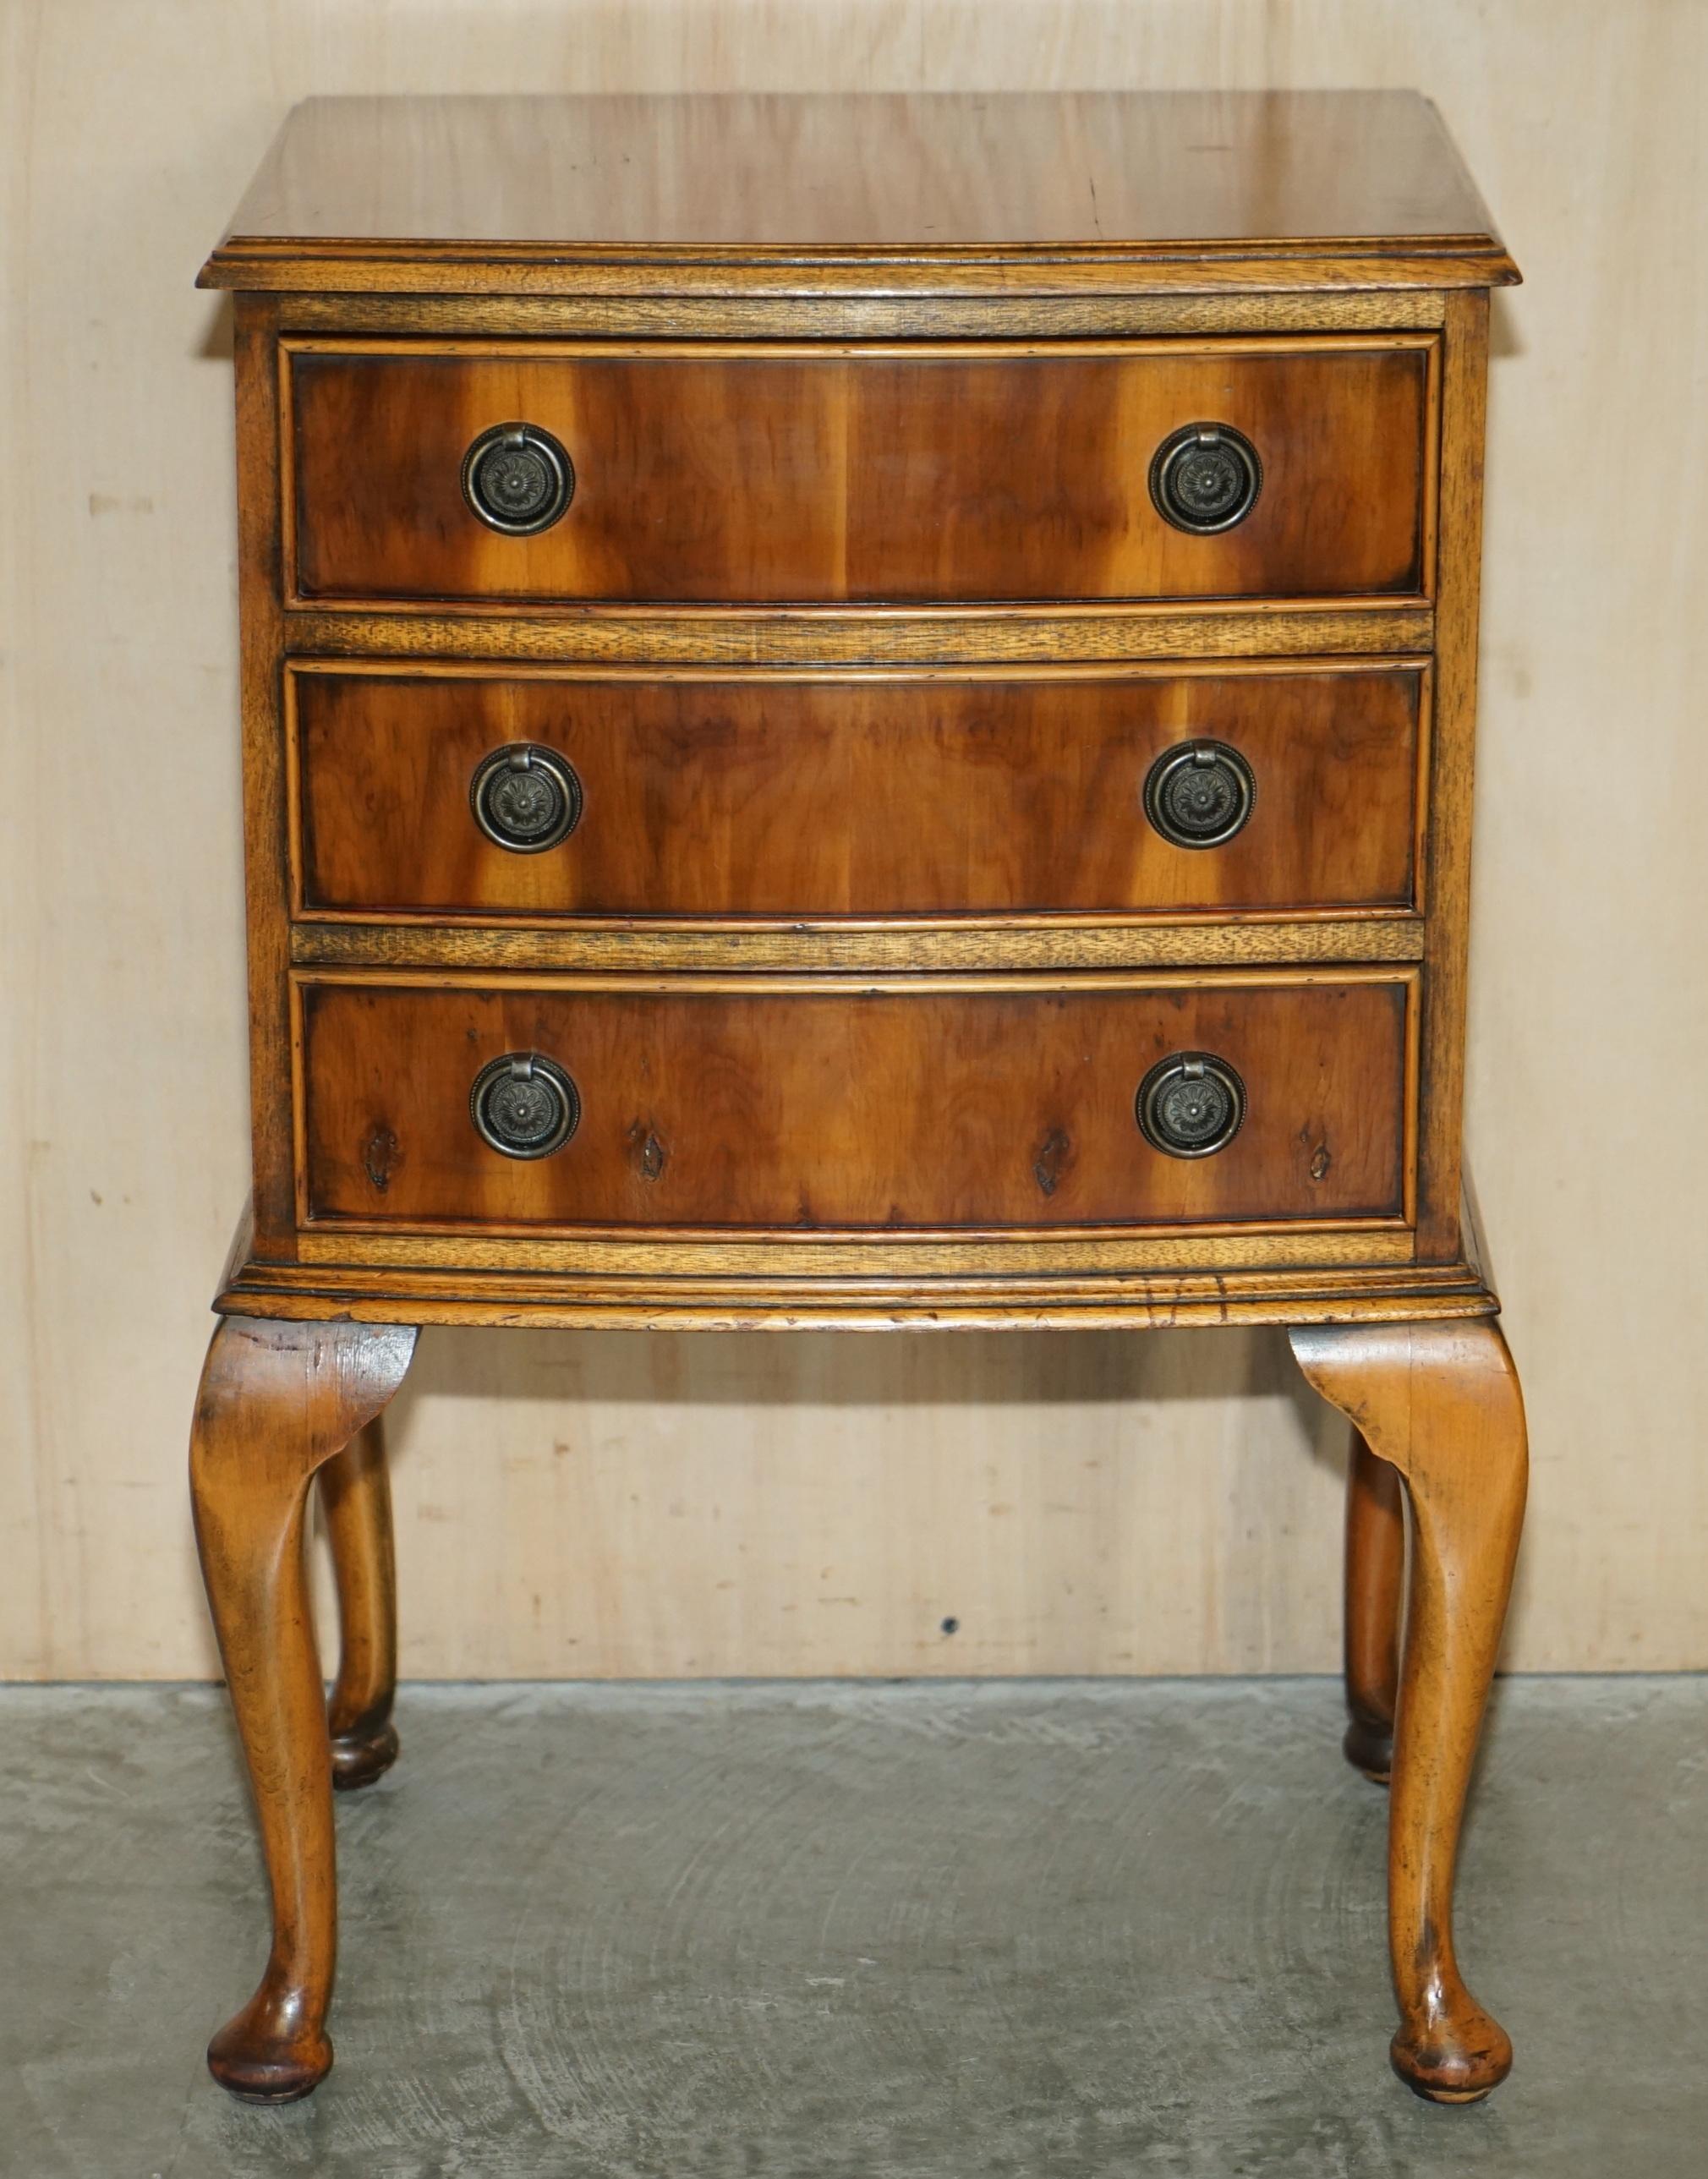 Royal House Antiques

Royal House Antiques is delighted to offer for sale this stunning Burr yew wood, bow fronted, bedside / side end table sized drawers

Please note the delivery fee listed is just a guide, it covers within the M25 only for